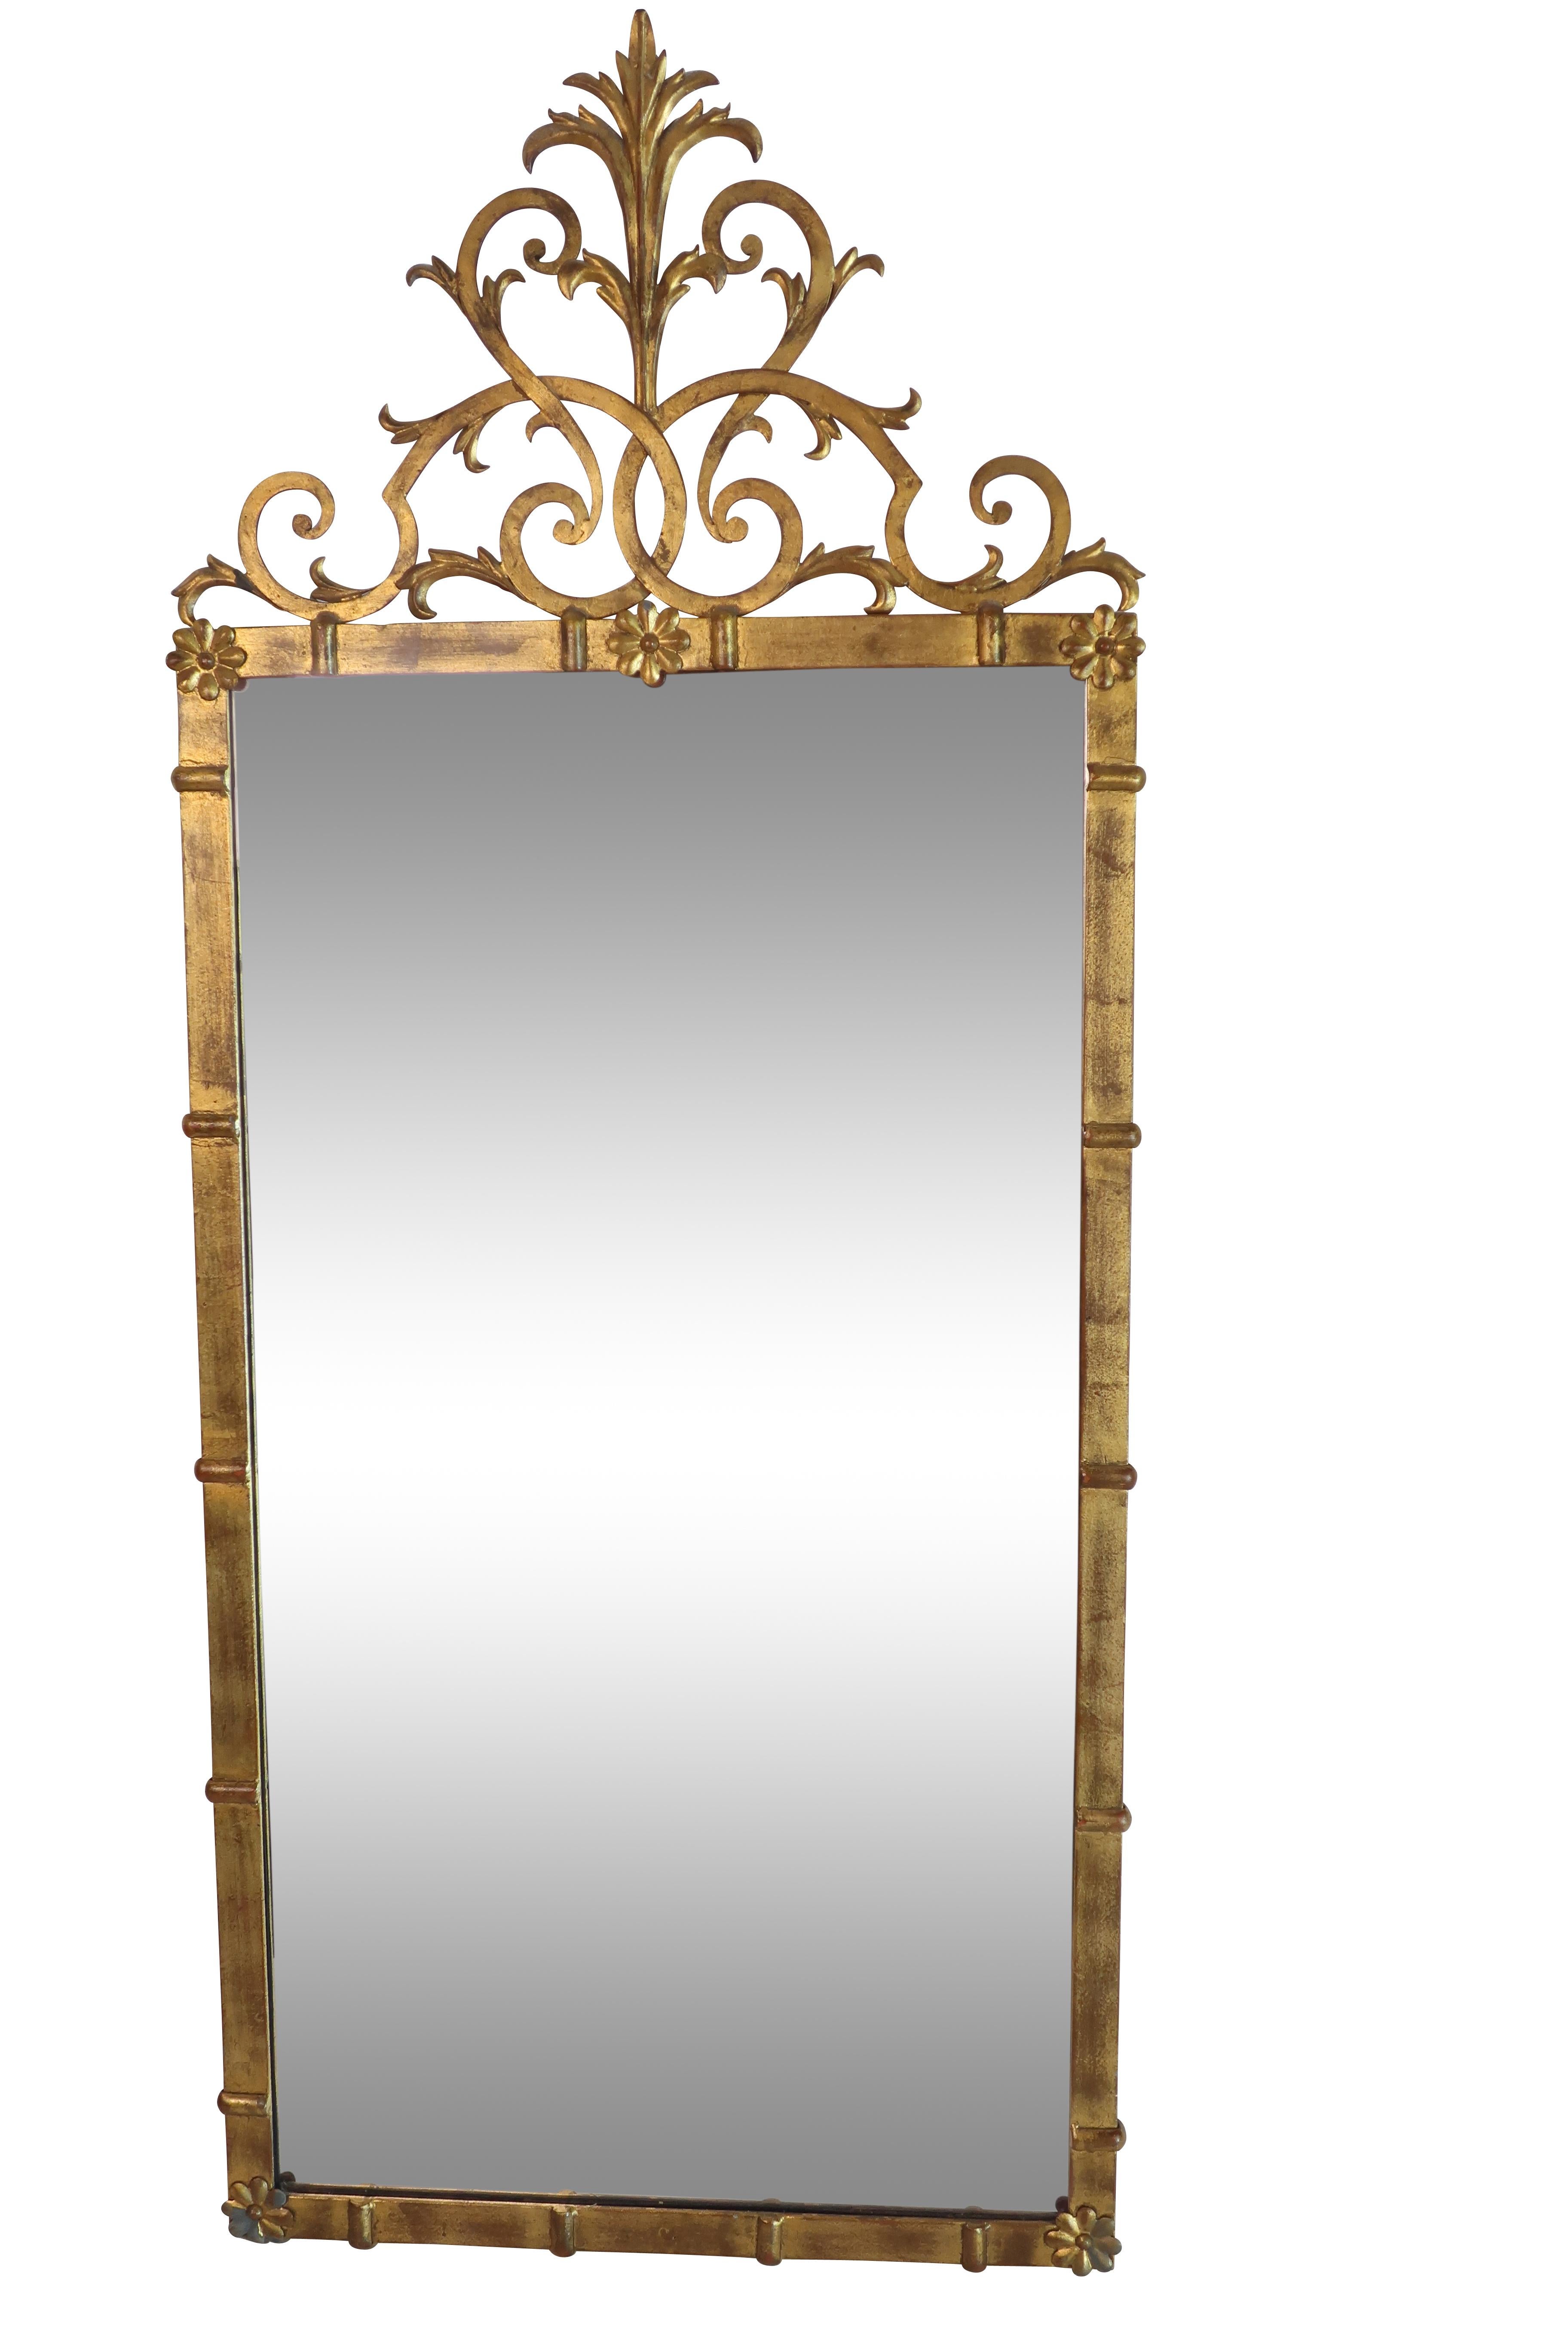 Mid-20th Century Classical Style Gold Metal Mirror with Rosette Decoration Scrolled Finial Top